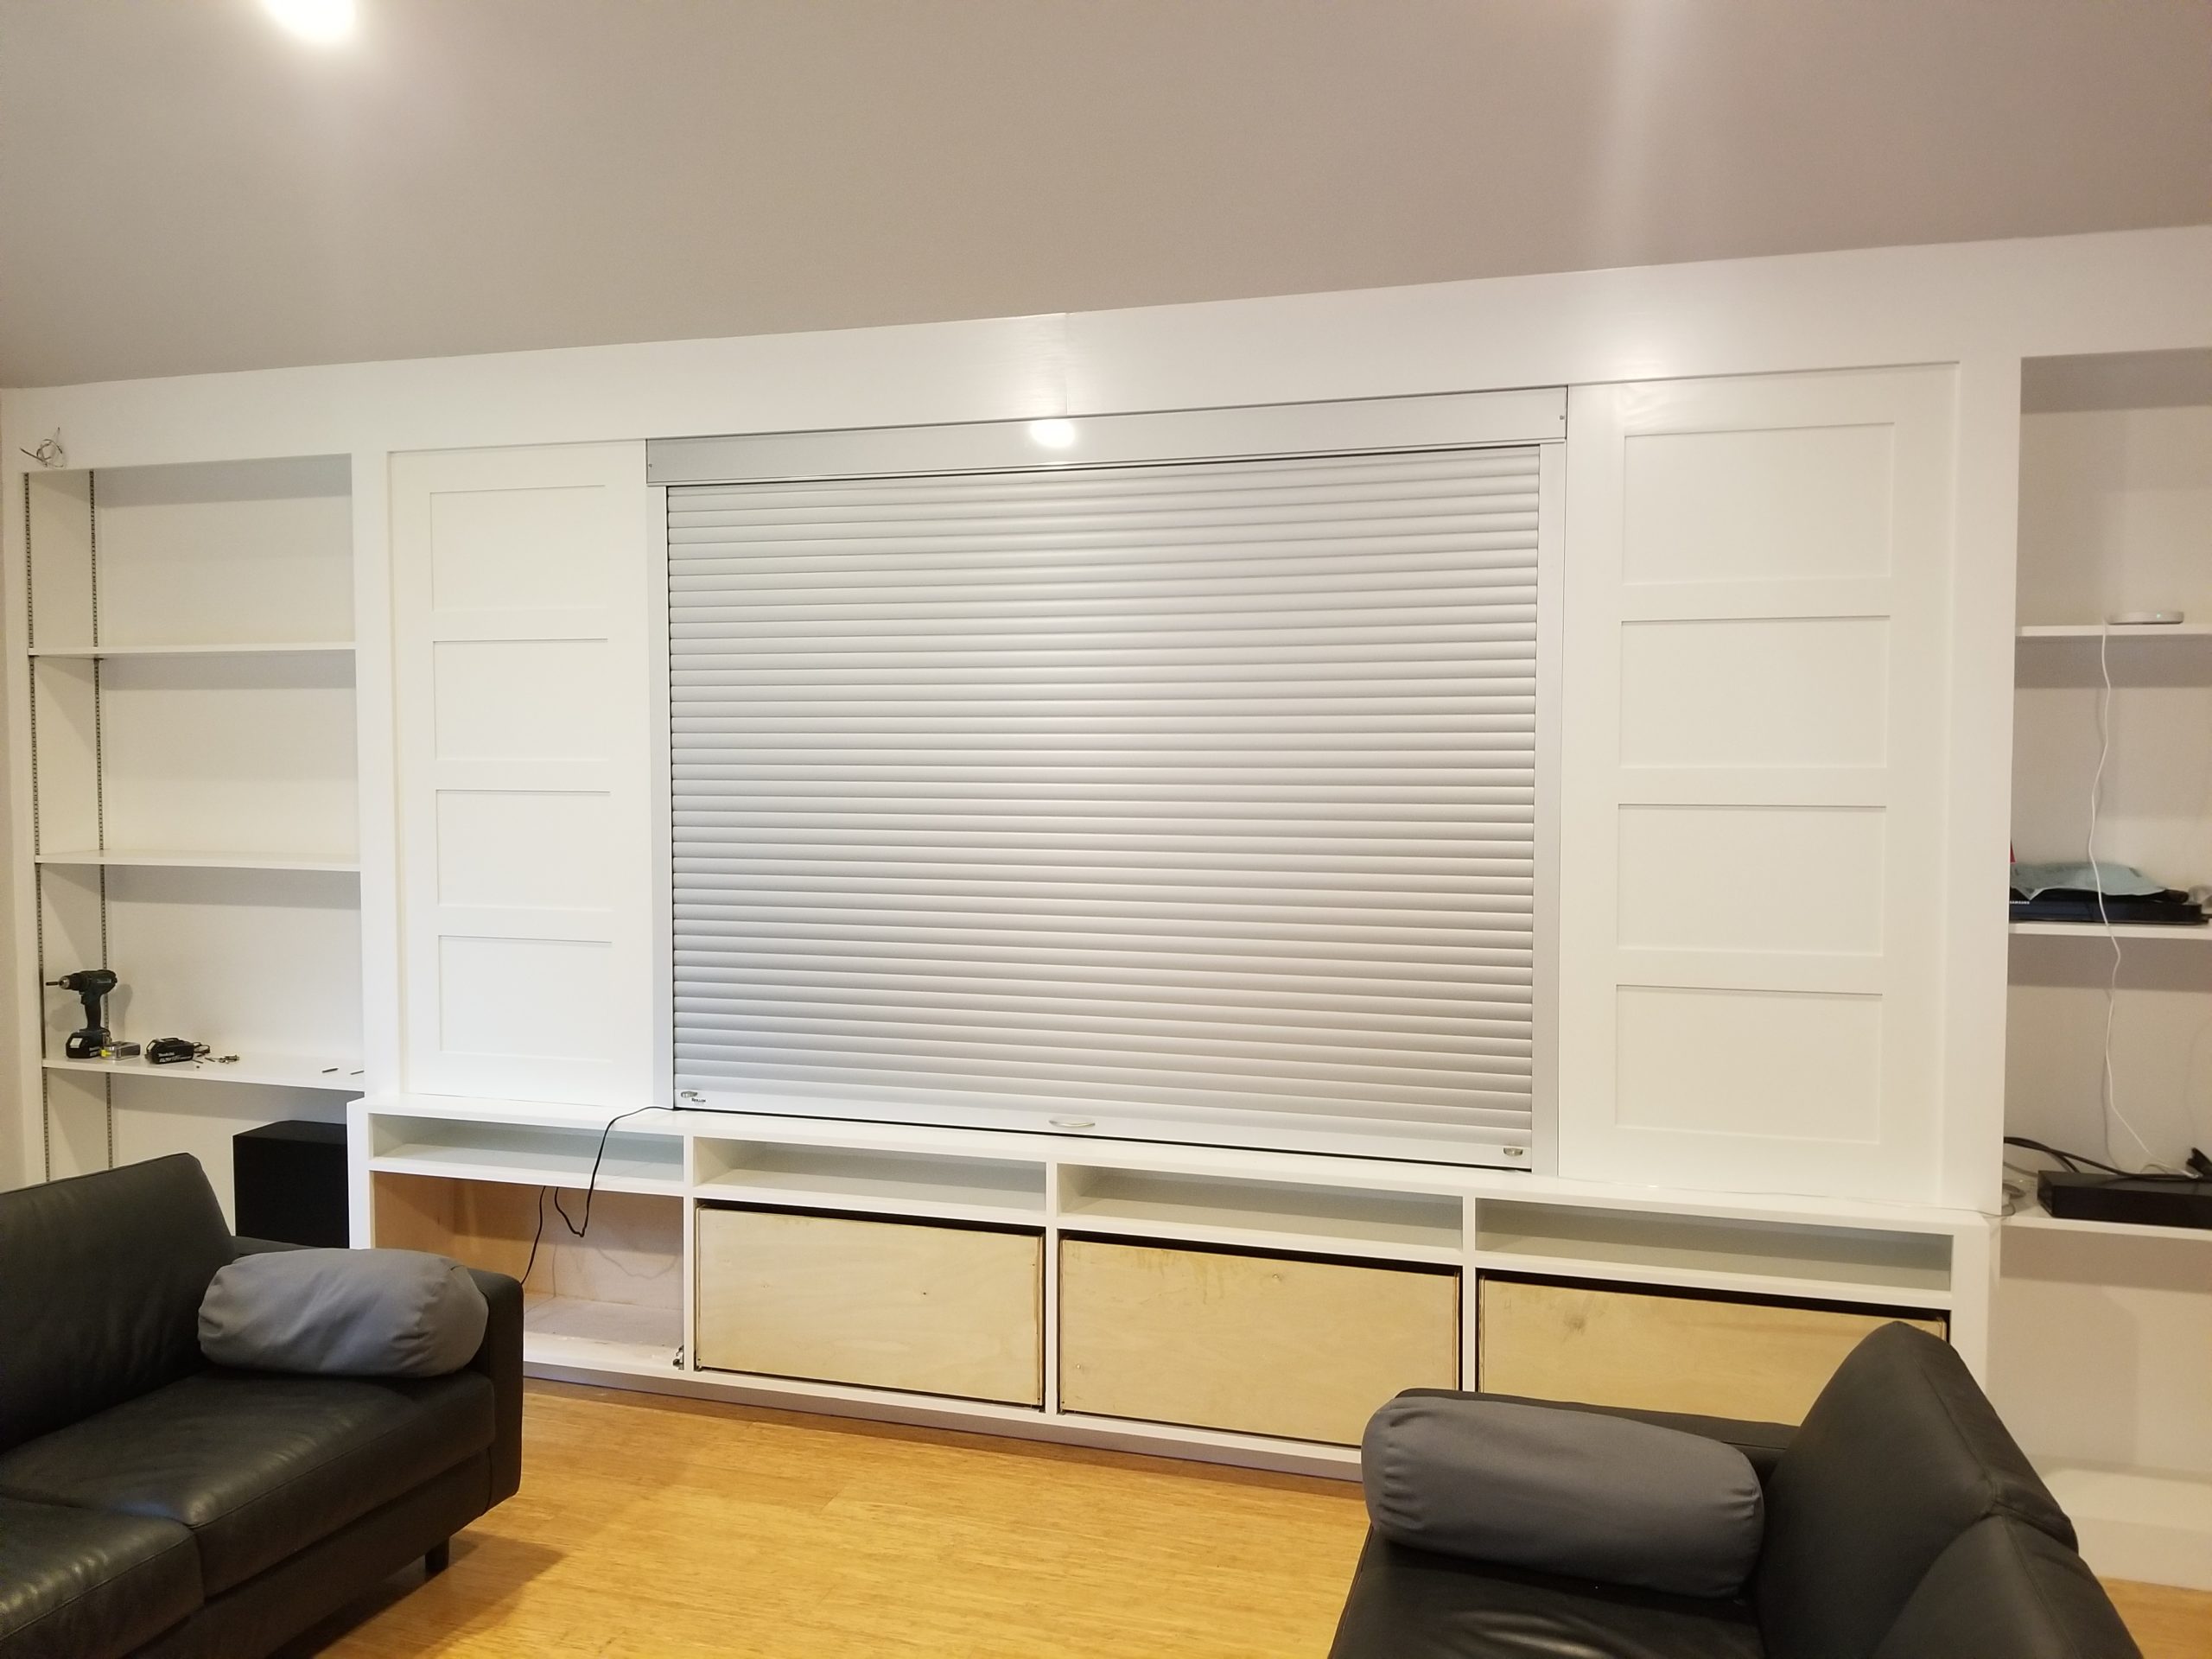 Residential Security Shutters and rolling doors